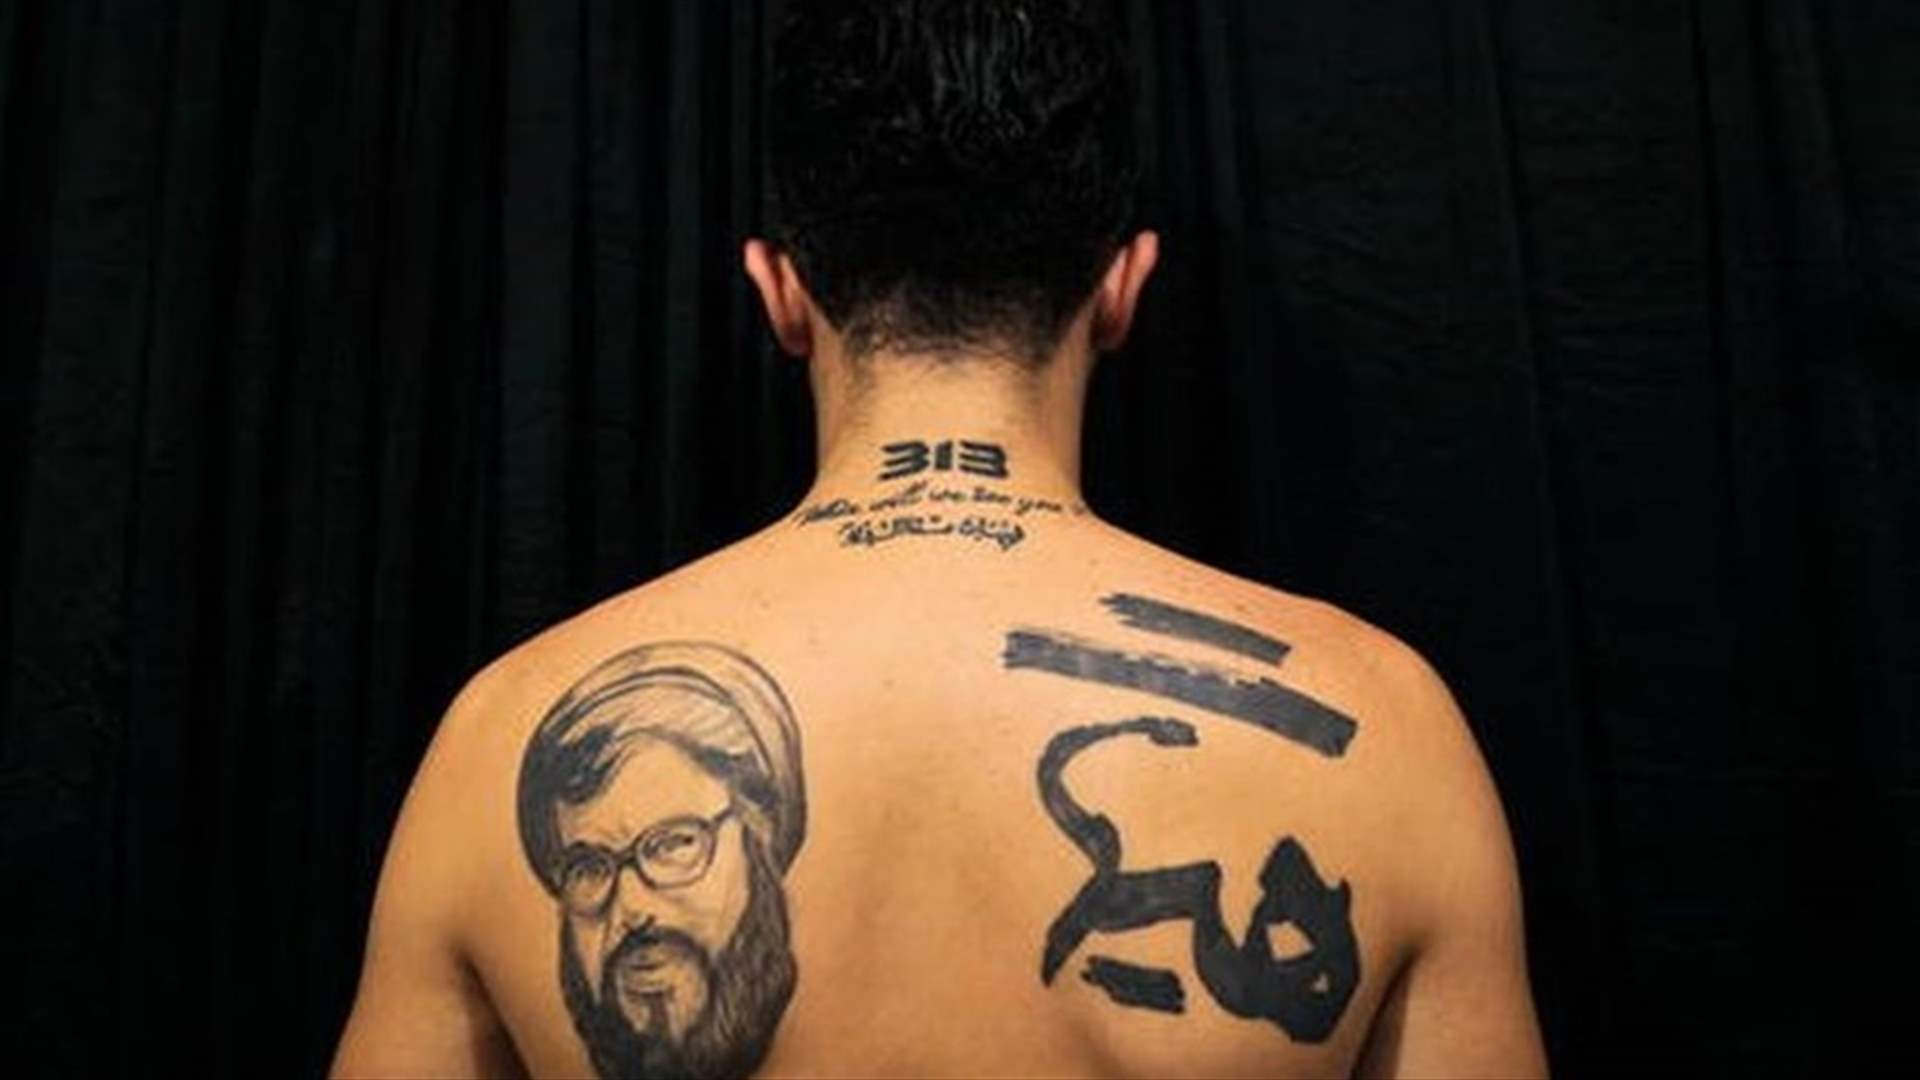 [PHOTOS] Shiite tattoos a show of pride amid tensions